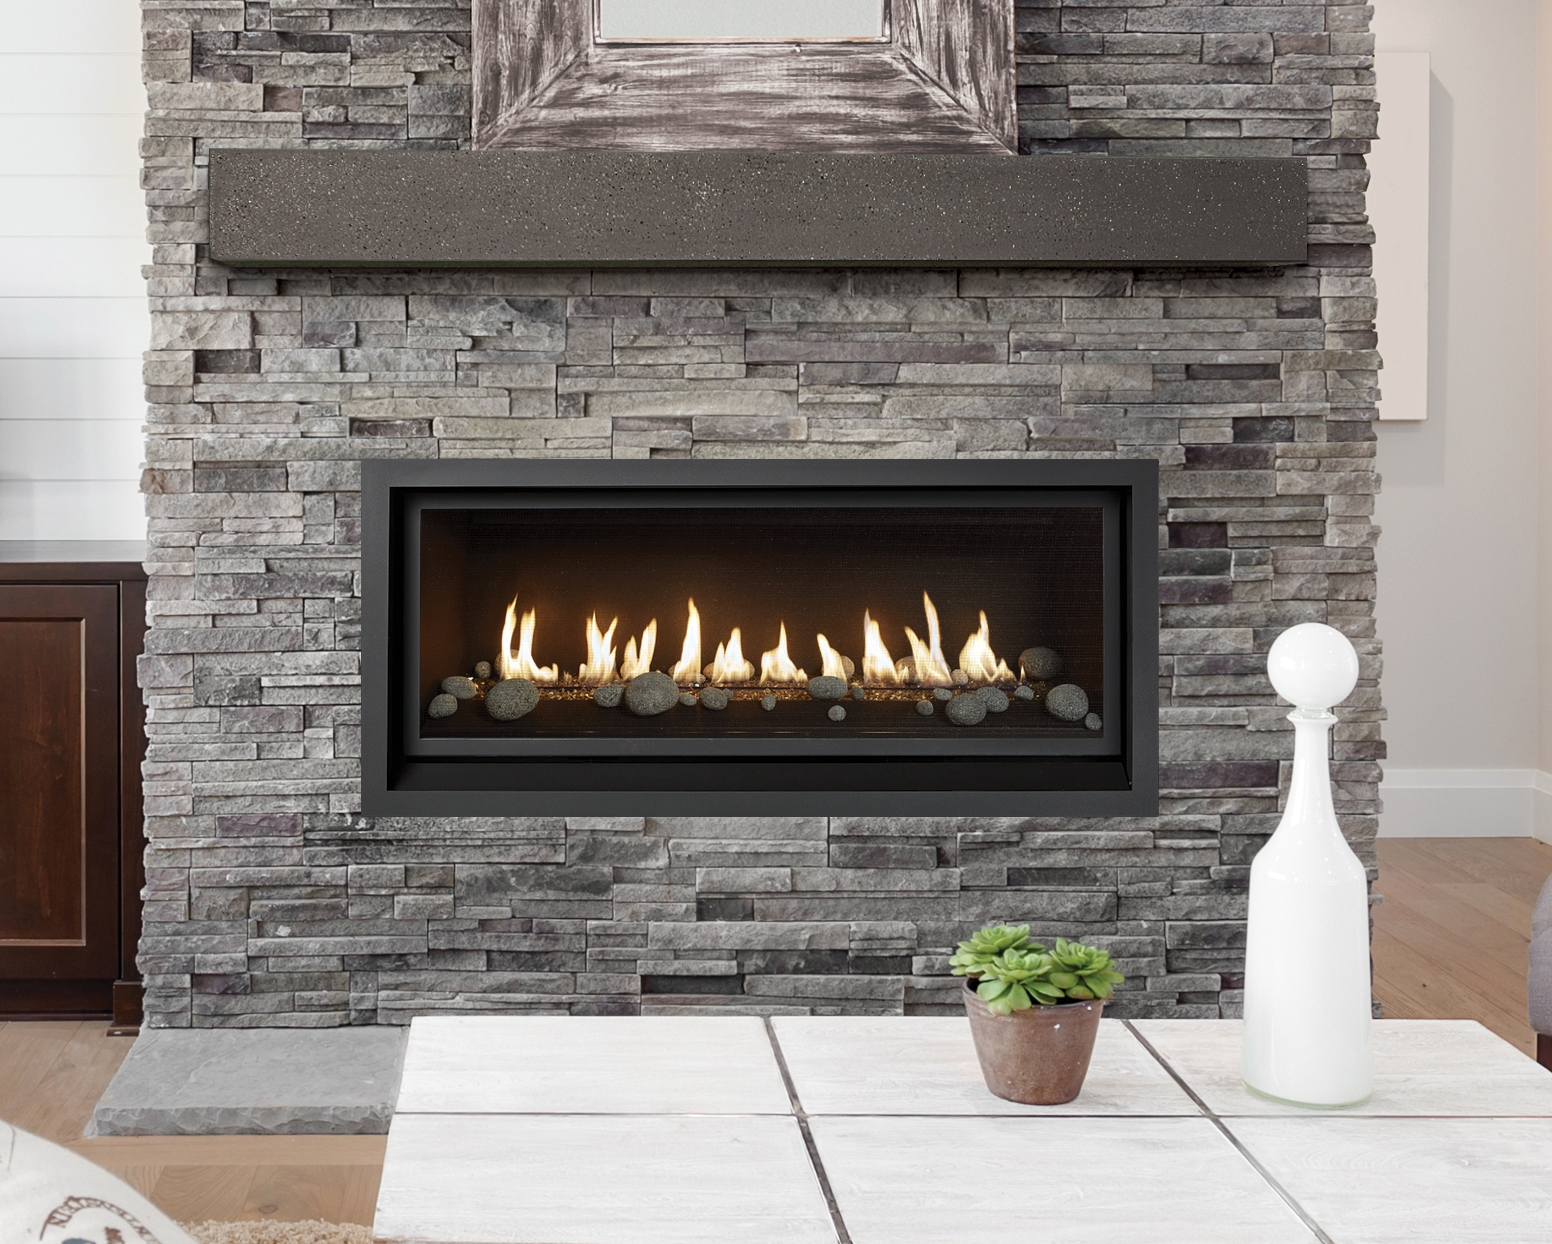 Image of a Fireplace Xtordinair ProBuilder 42 Gas Fireplace with a link to the product page.